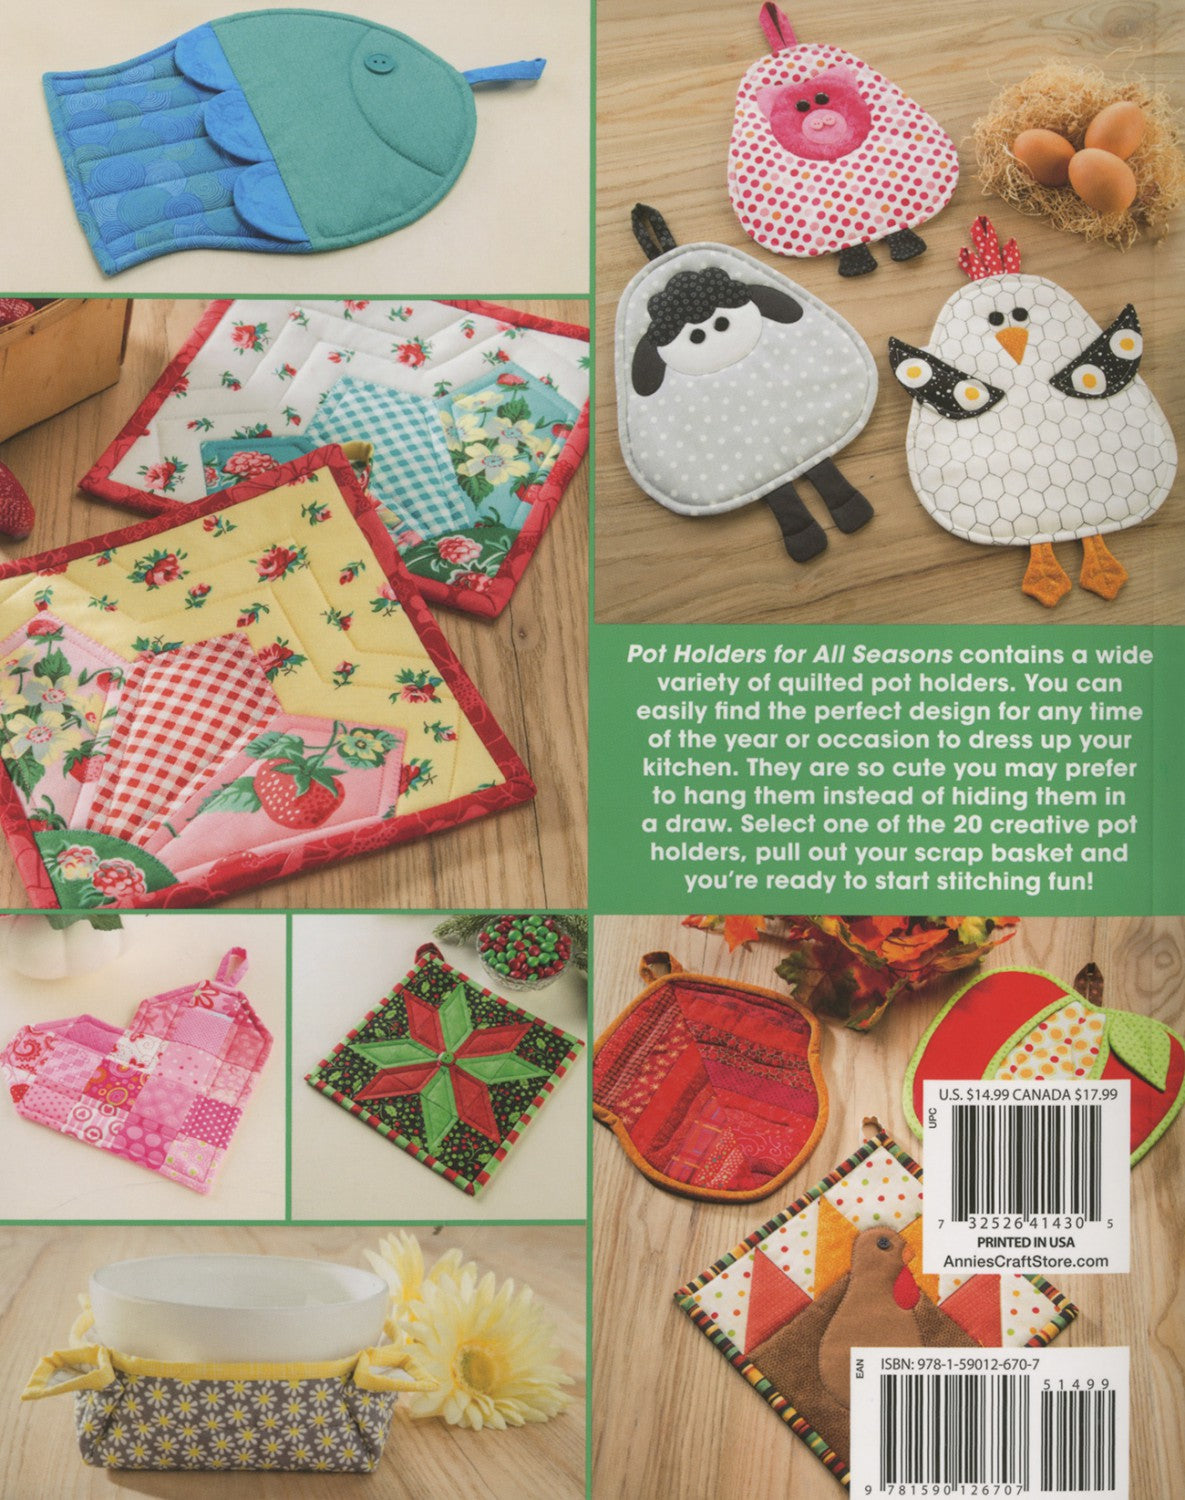 Pot Holders for All Seasons by Chris Malone from Annies – sewinthemood